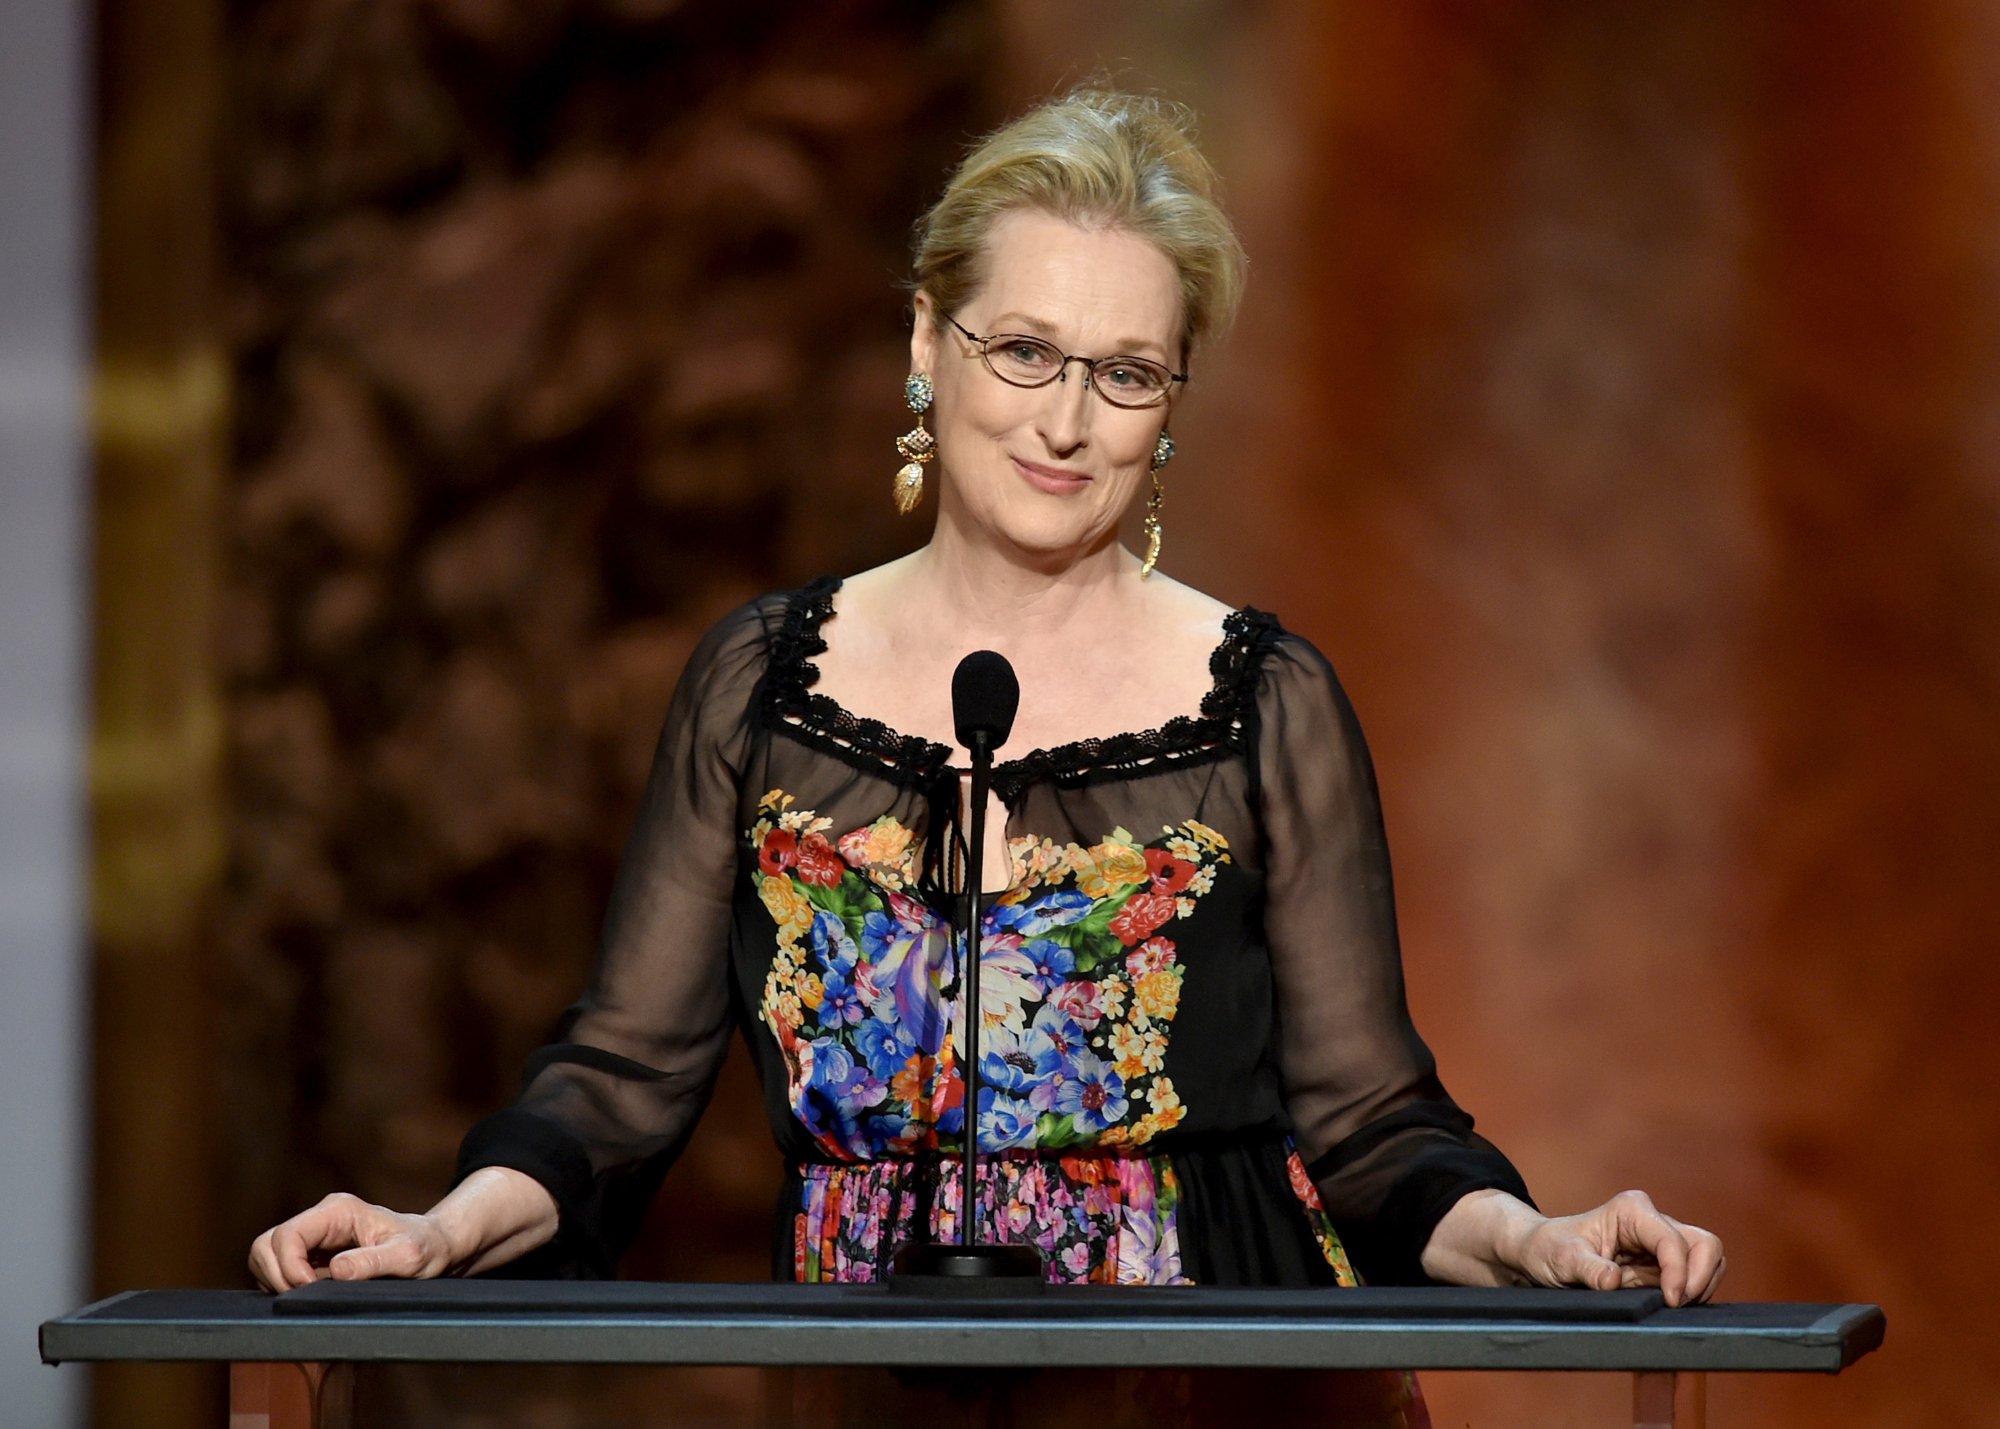 Meryl Streep honoring Jane Fonda for movie career in front of a microphone with her hands on the podium